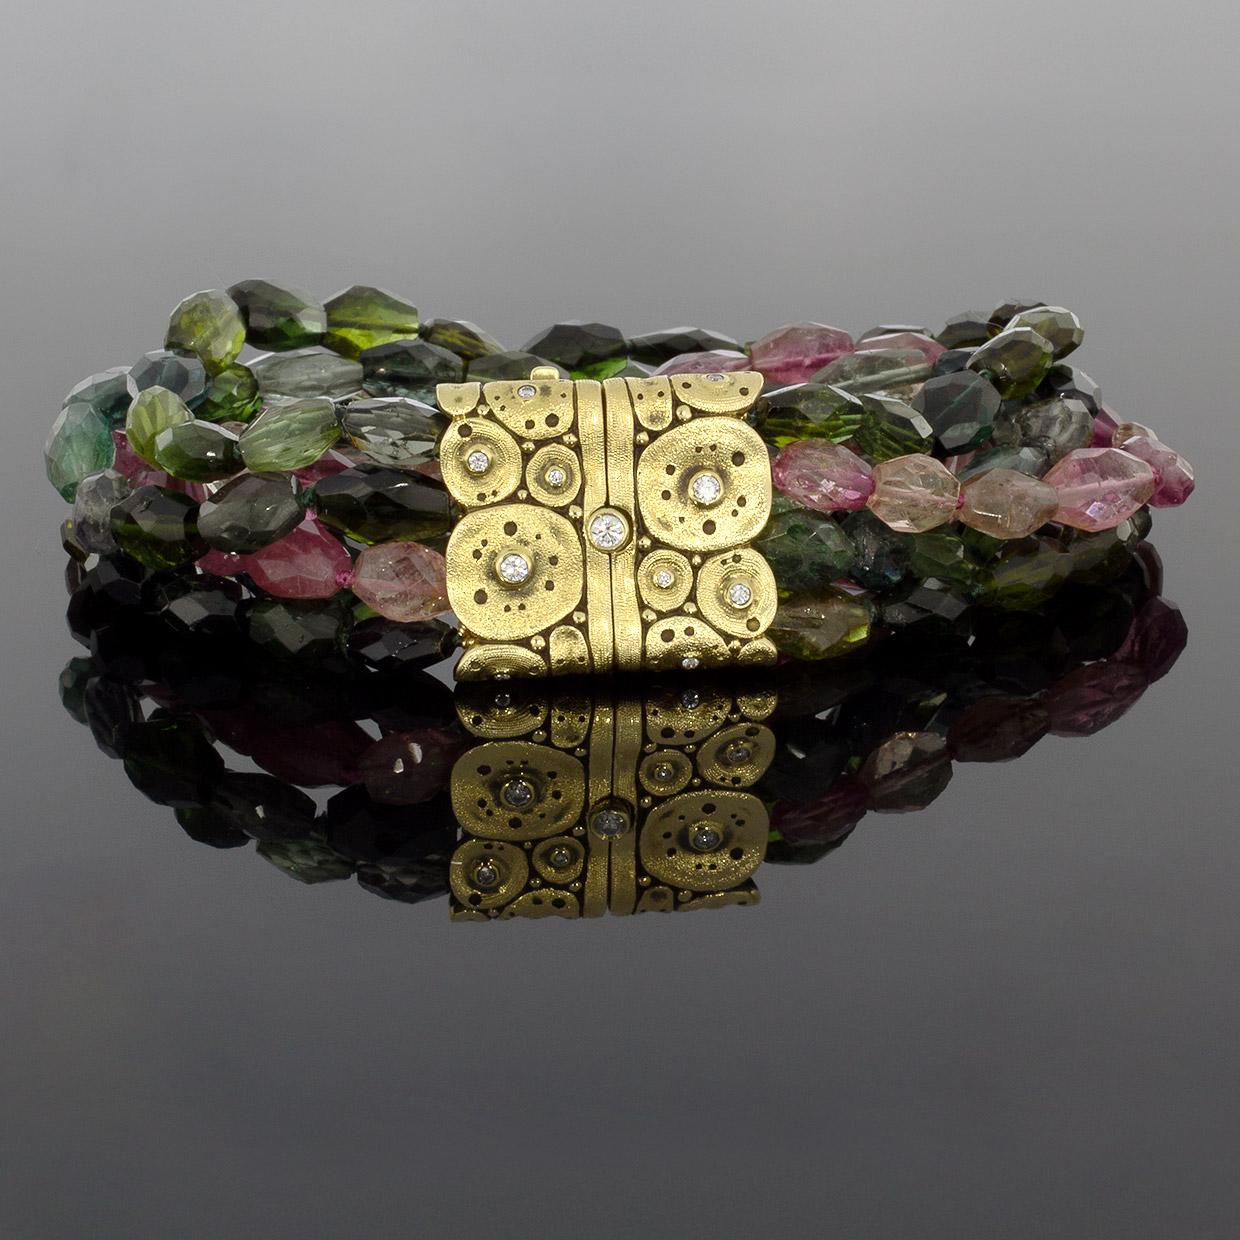 Item Details

Main Stone Treatment Not Enhanced
Main Stone Shape Specialty
Secondary Stone Diamond
Main Stone Creation Natural
Main Stone Tourmaline
Estimated Retail $12,100.00
Brand Alex Sepkus
Collection Lillies
Metal Yellow Gold
Style